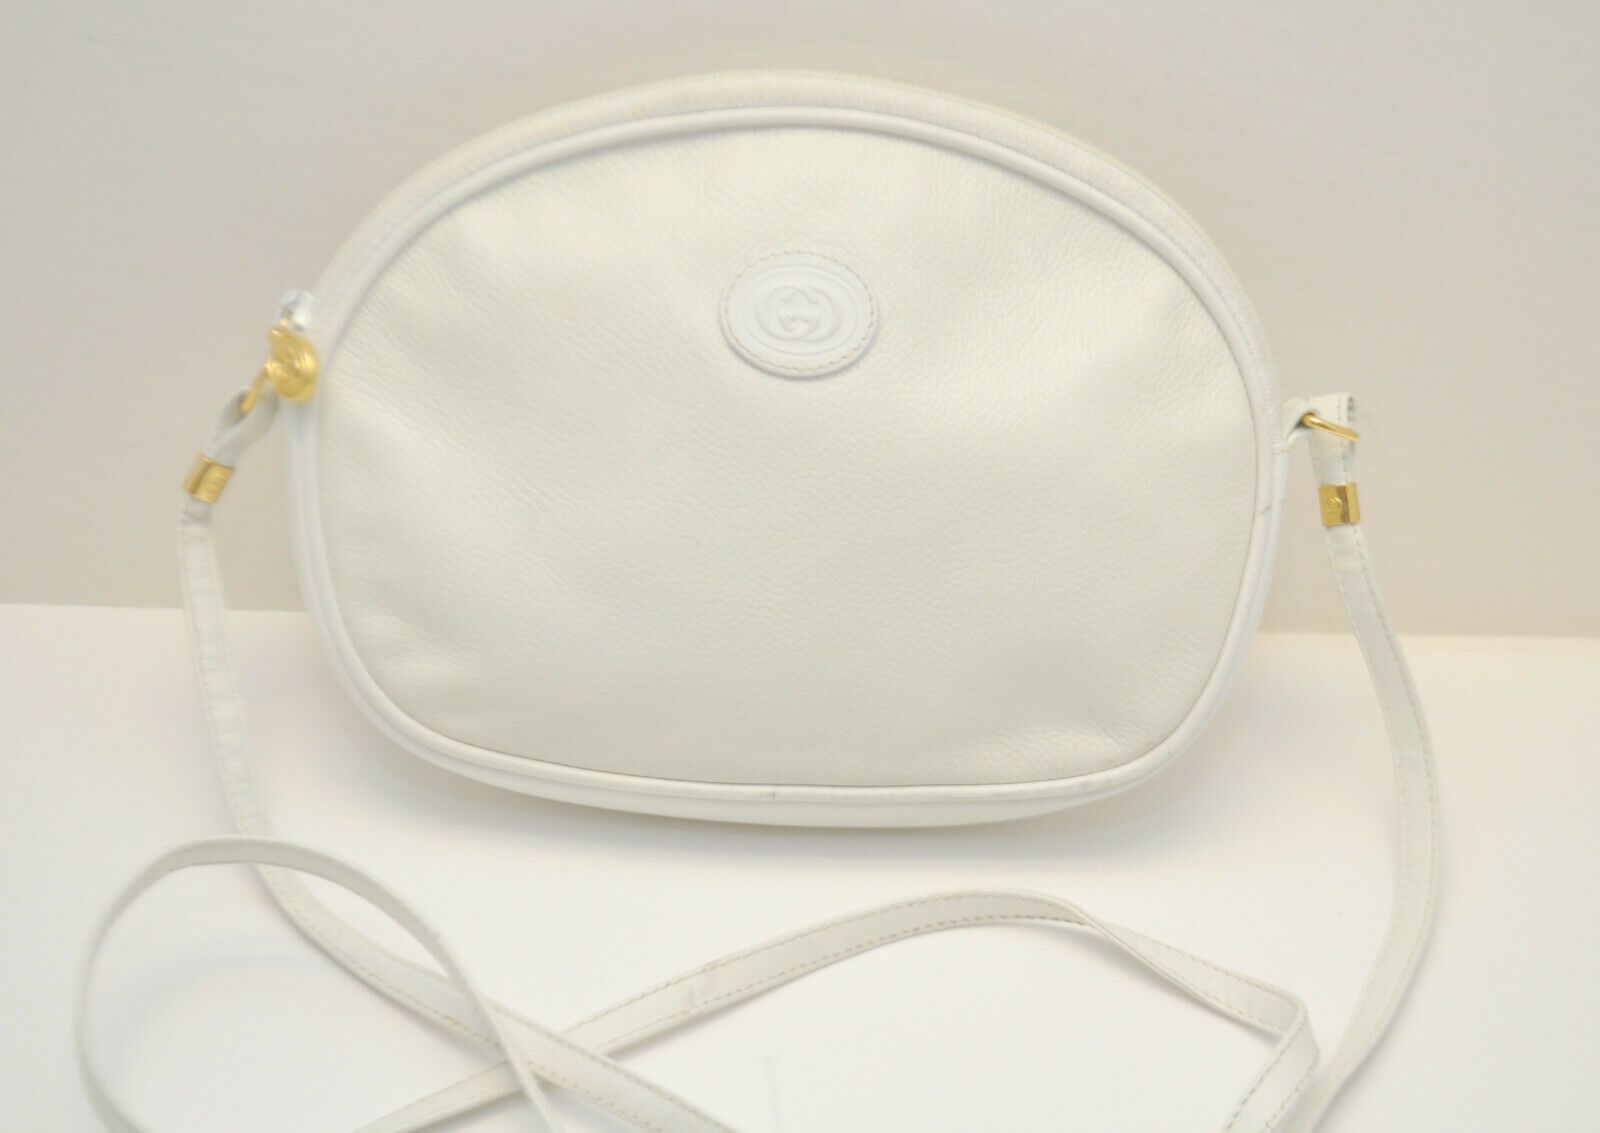 Pre-Owned Vintage Authentic GUCCI GG White Leather Small Shoulder Crossbody Bag